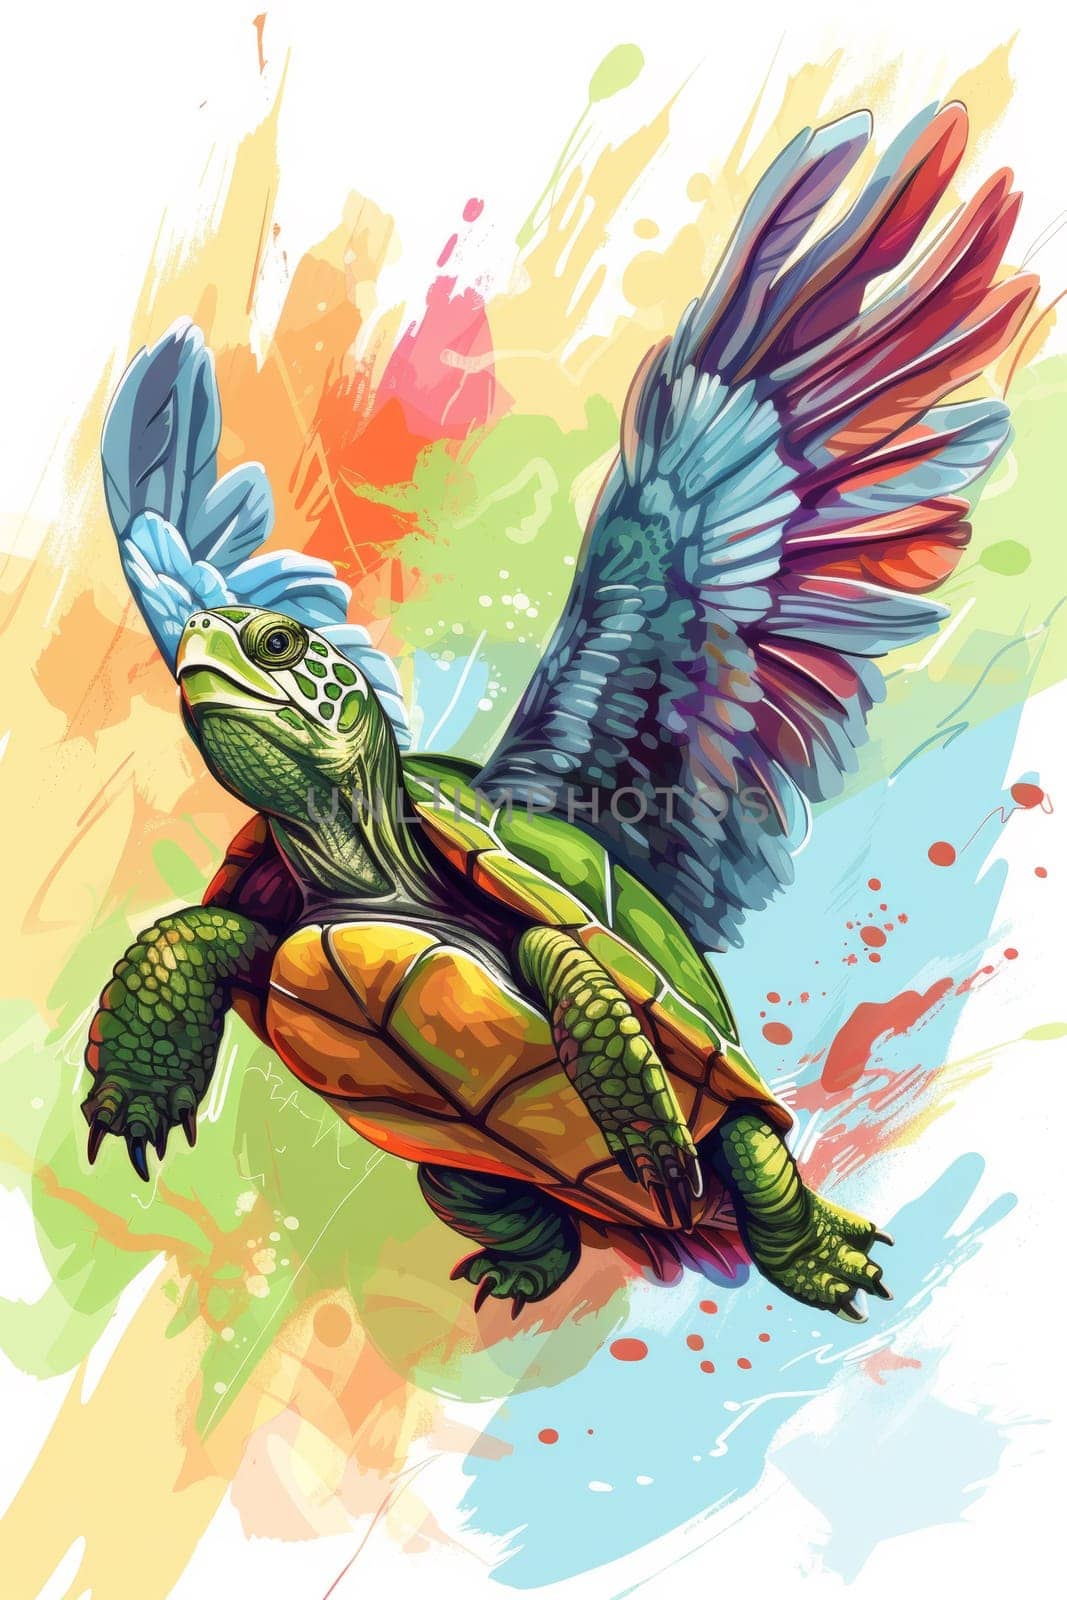 A painting of a colorful turtle with wings flying in the air